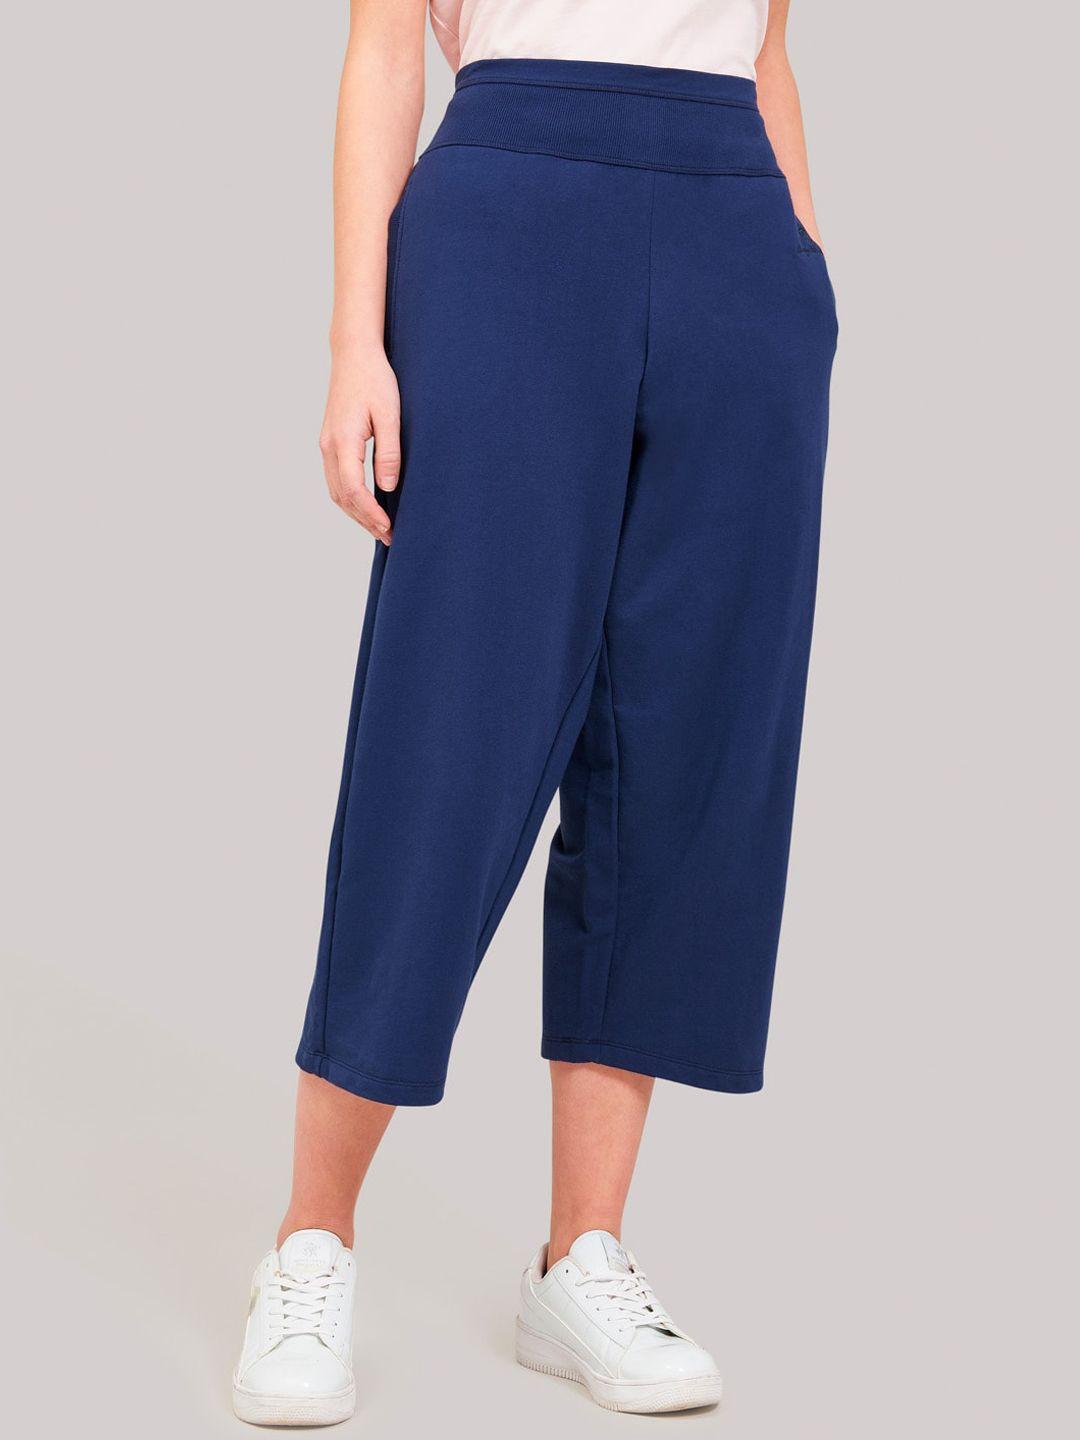 beverly hills polo club women blue regular fit solid culottes